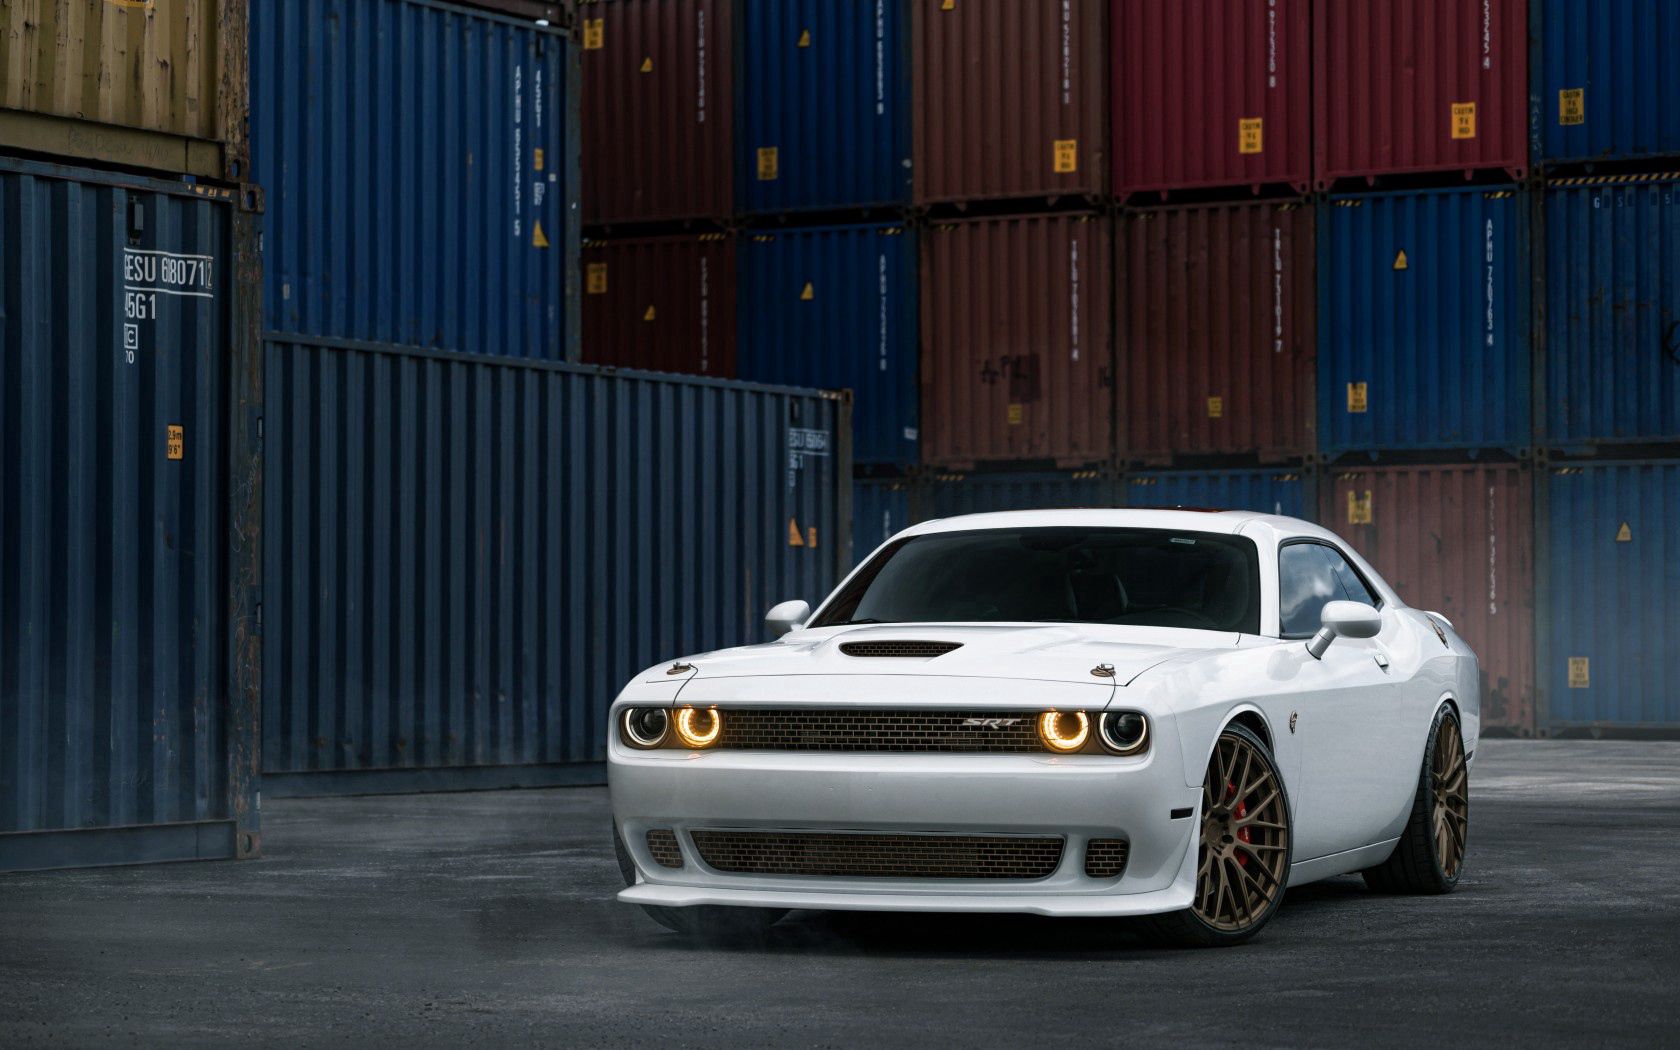 Free Images front view, cars, white Dodge Challenger